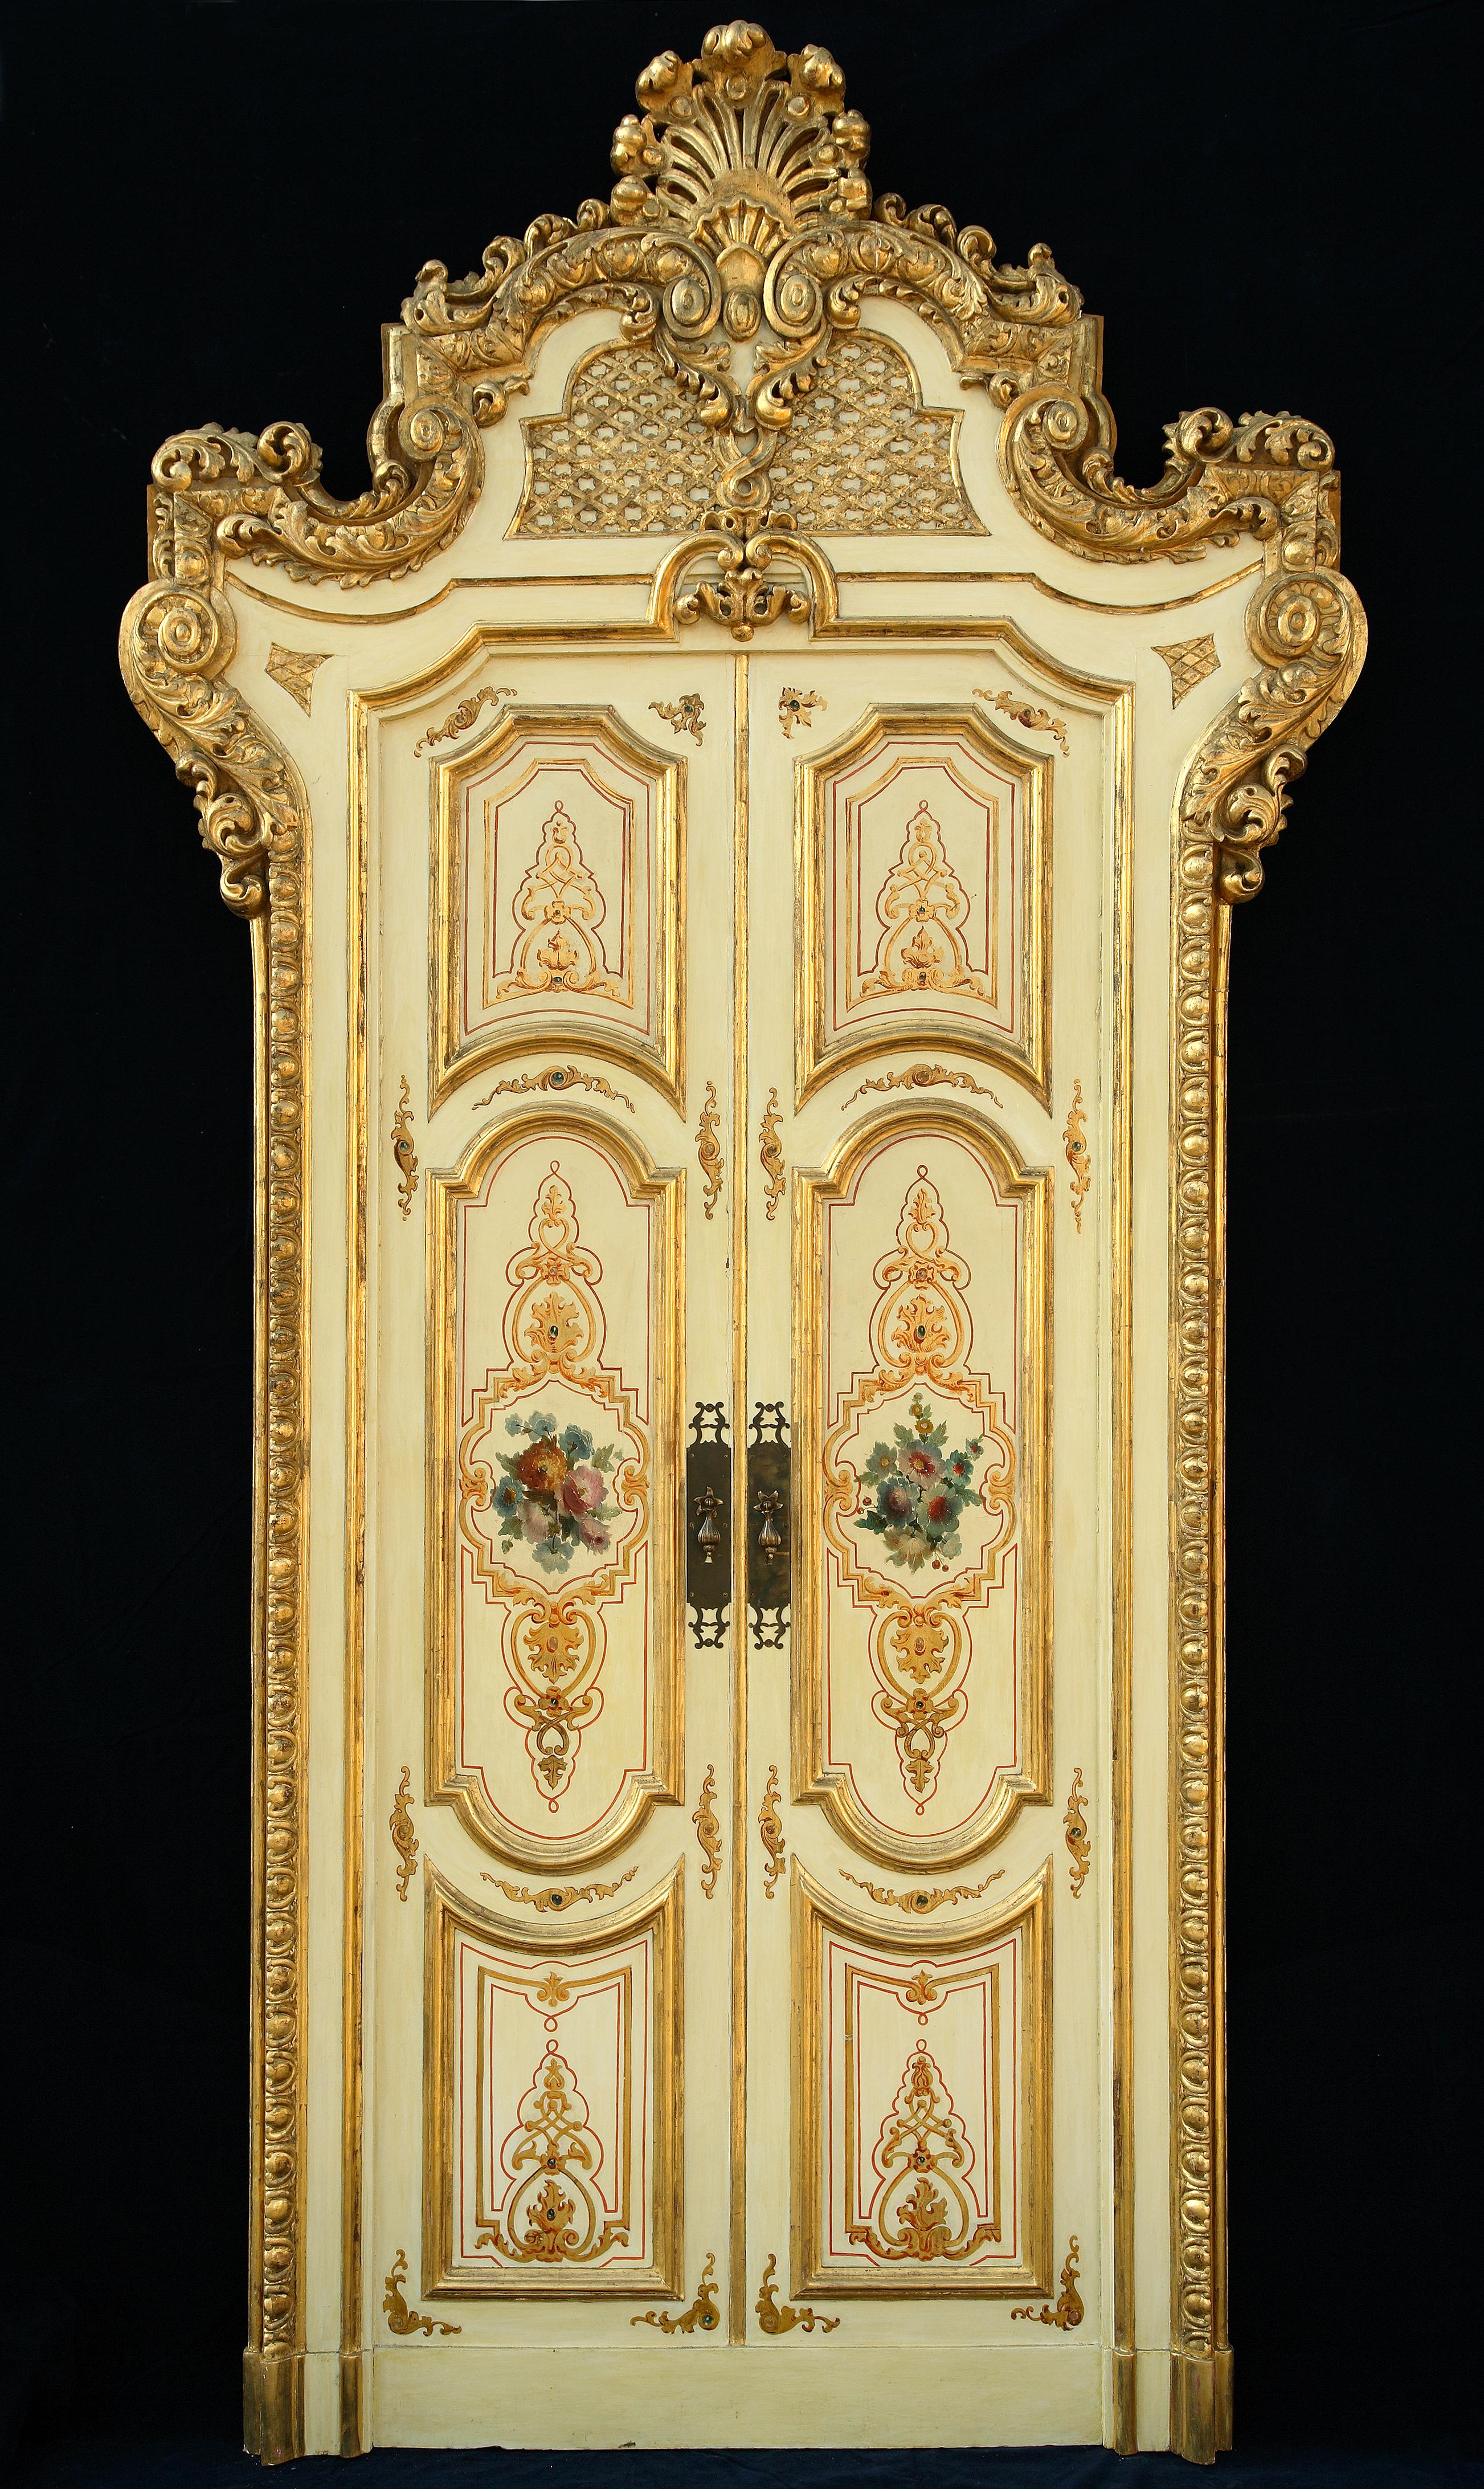 Exceptional set of two double doors and two false double doors, made in lacquered and gilded wood, decorated with gilded motifs and painted polychrome flower bunches.

Provenance: Venitian Palace.